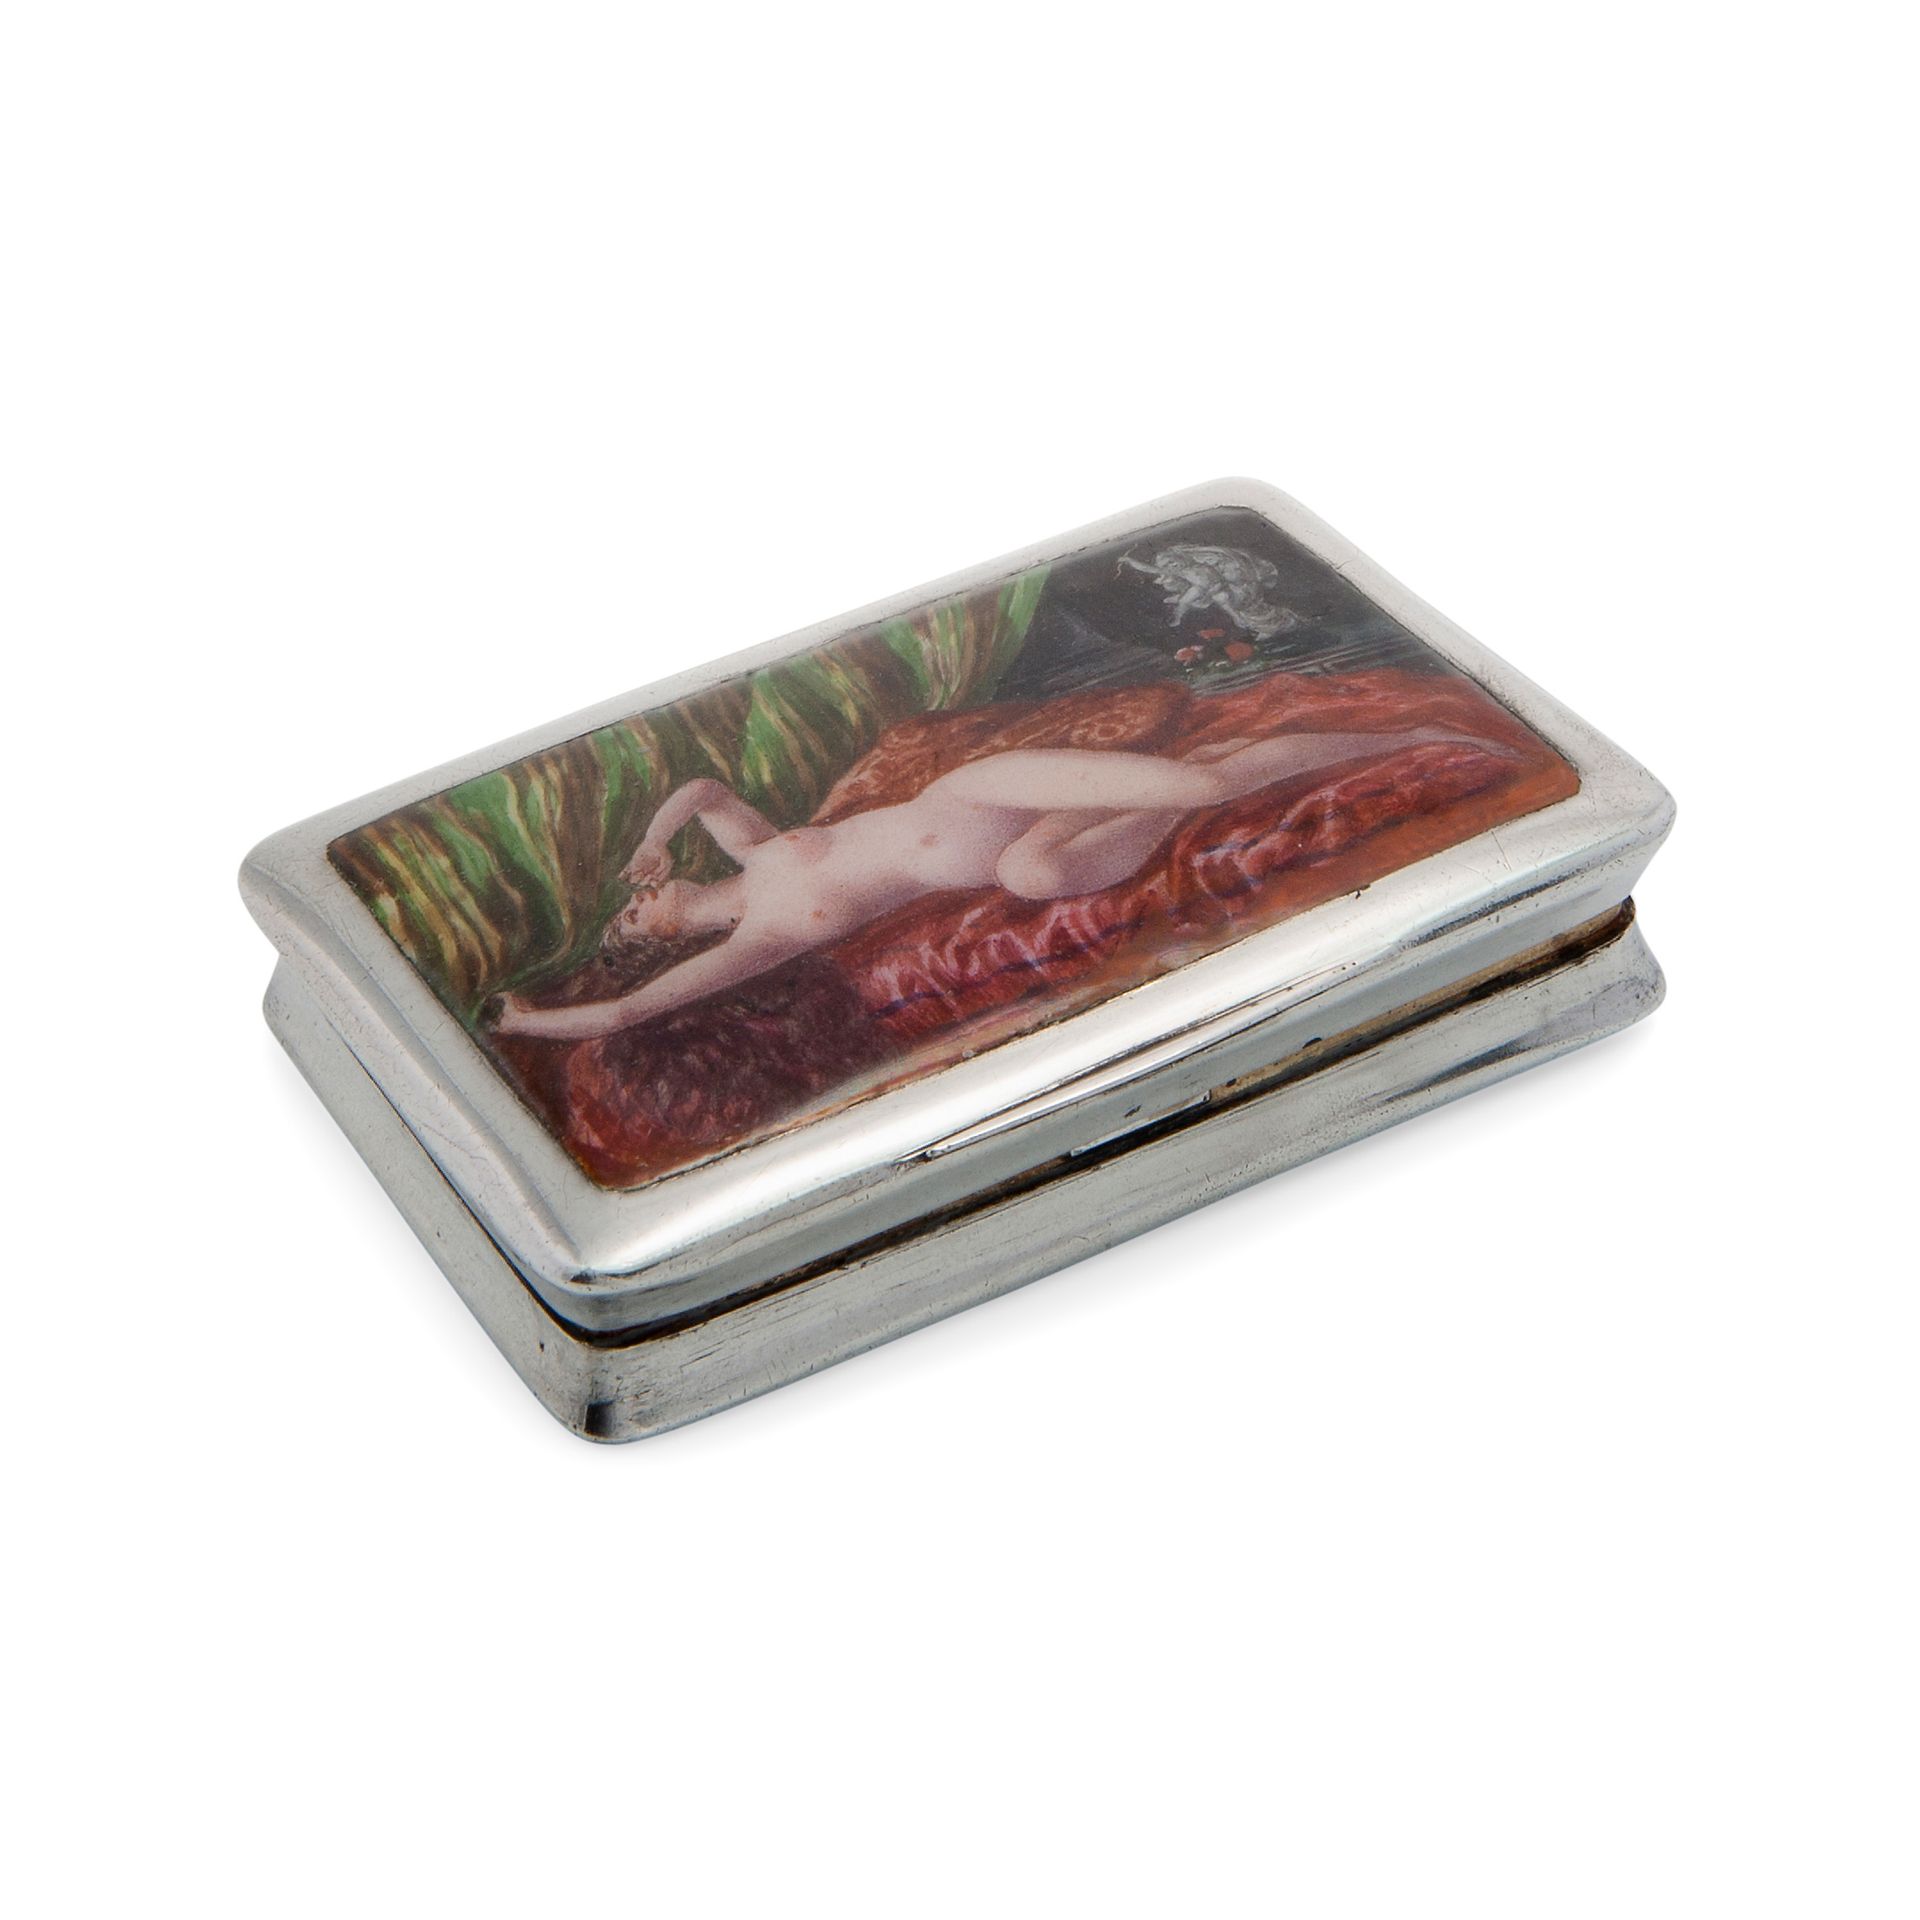 Snuff box with nude in a bedroom, 20th century European manufacture Fabriqué en &hellip;